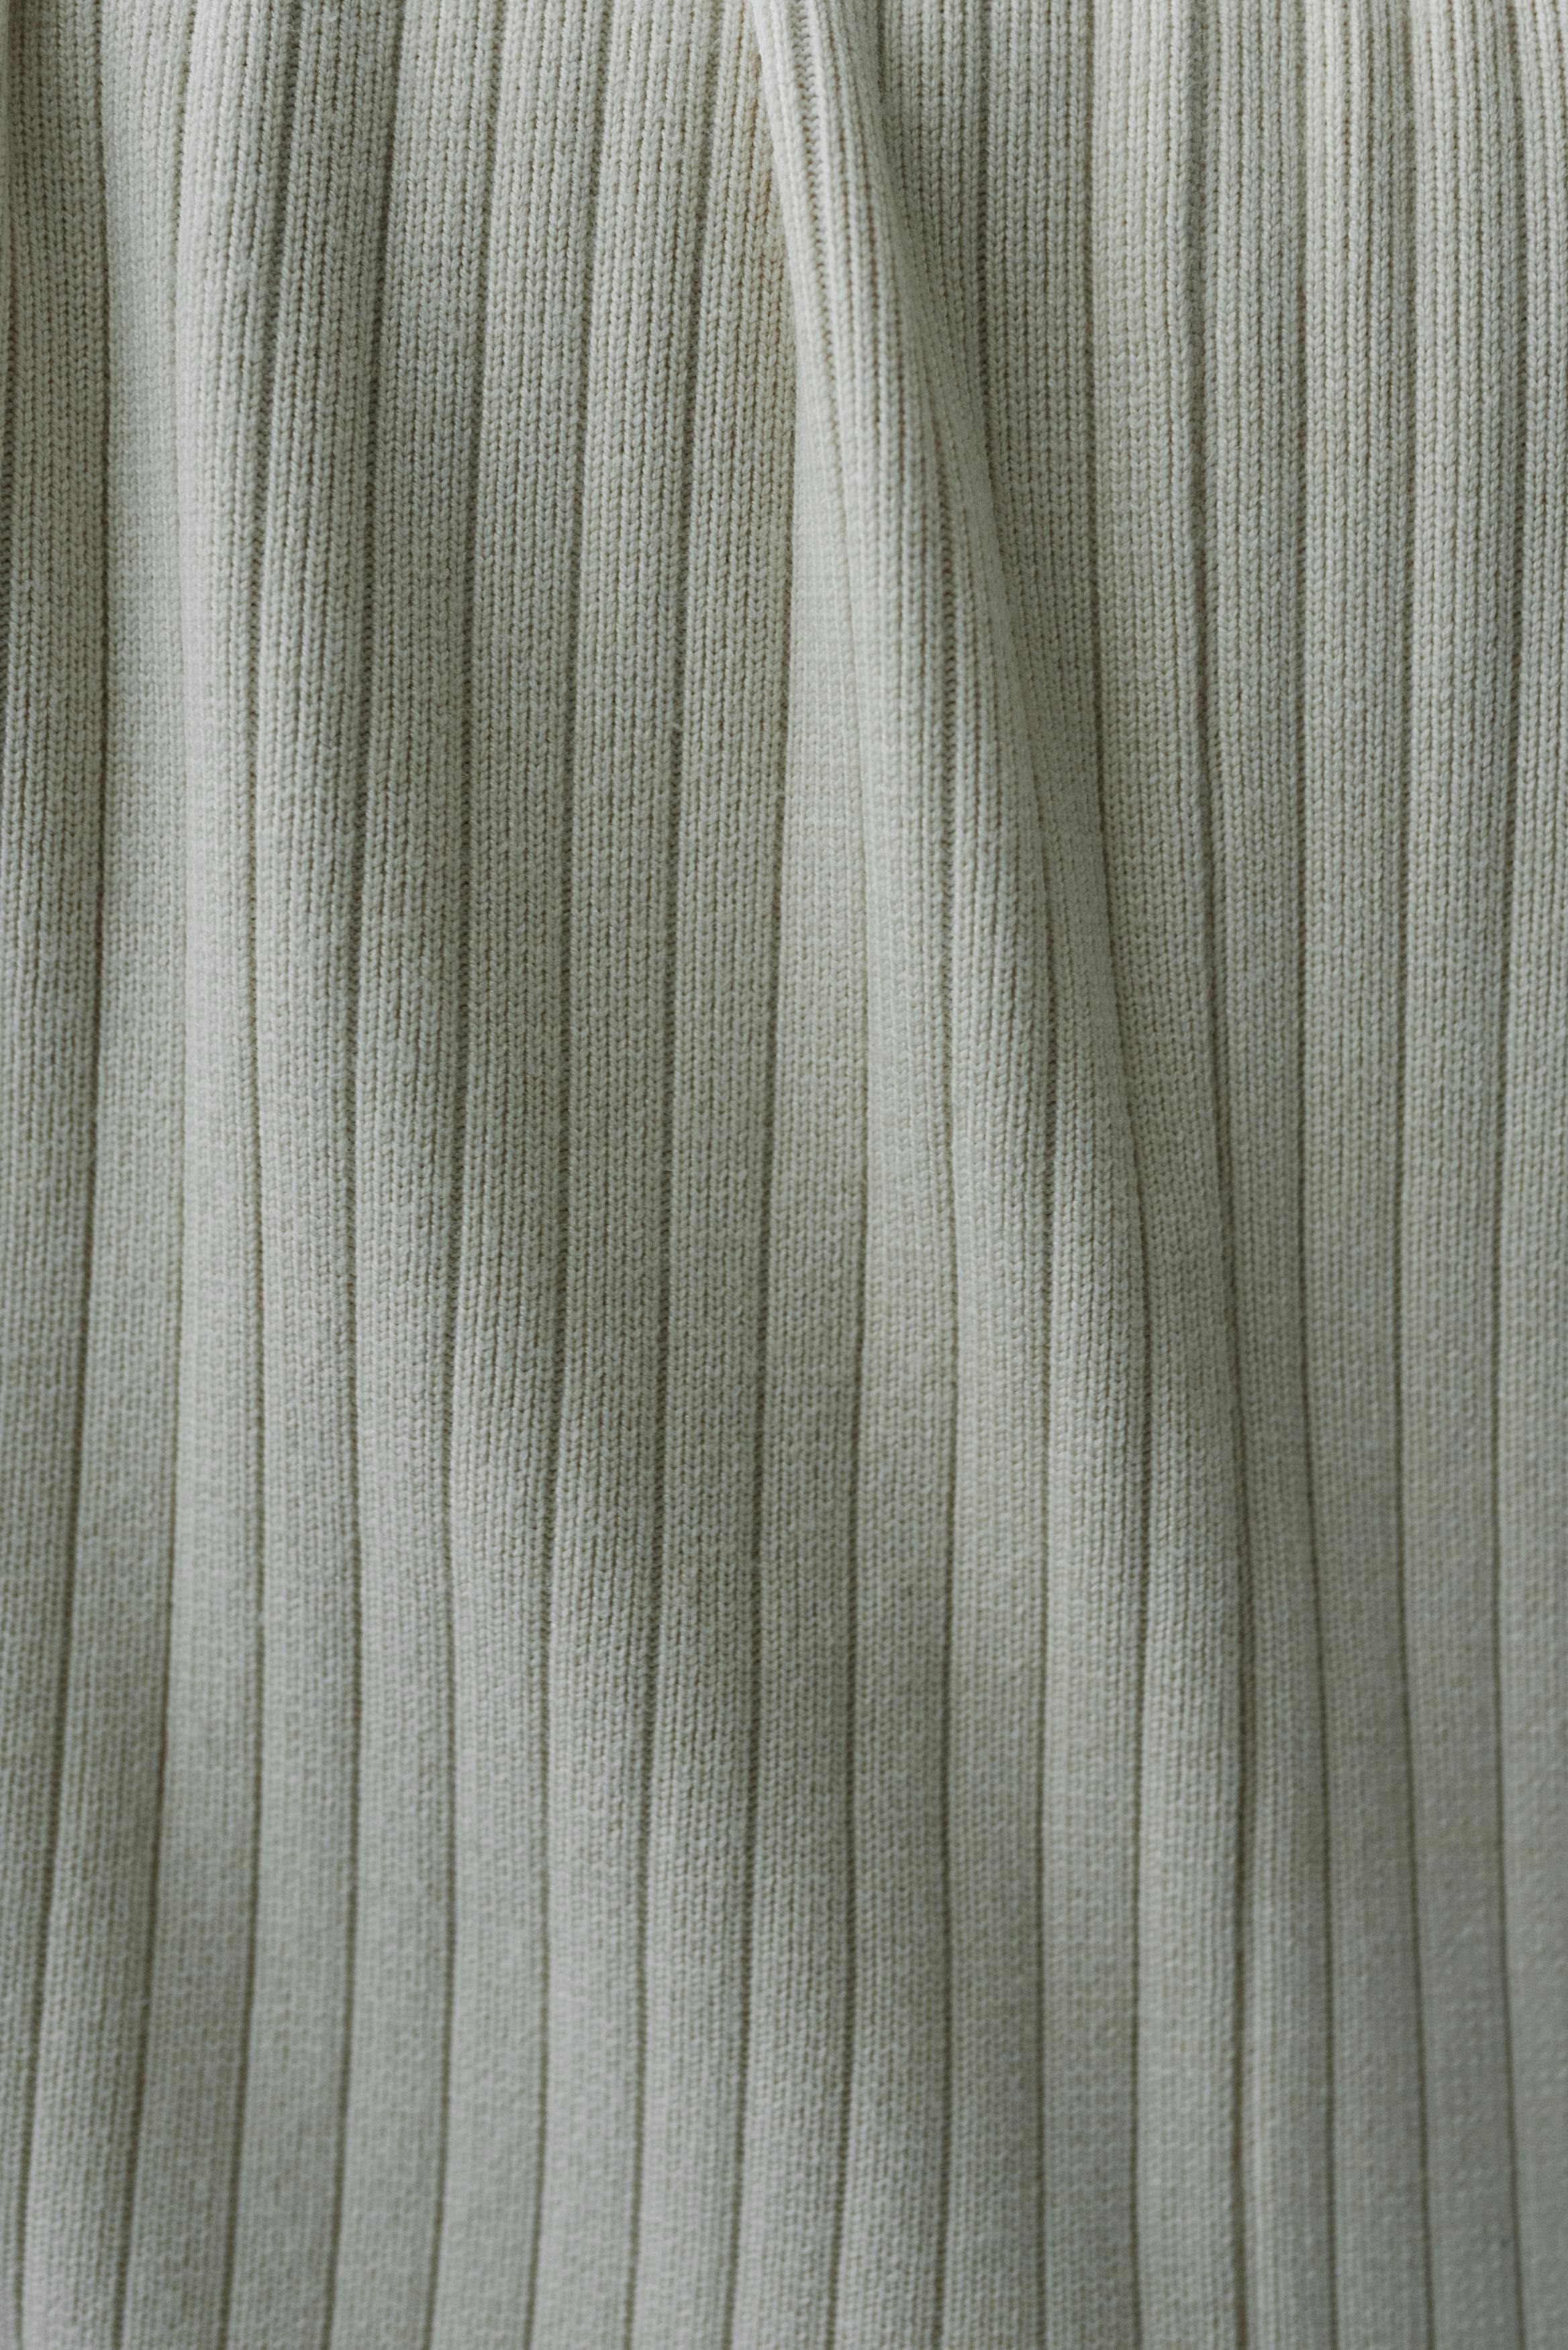 gray striped fabric placed on table